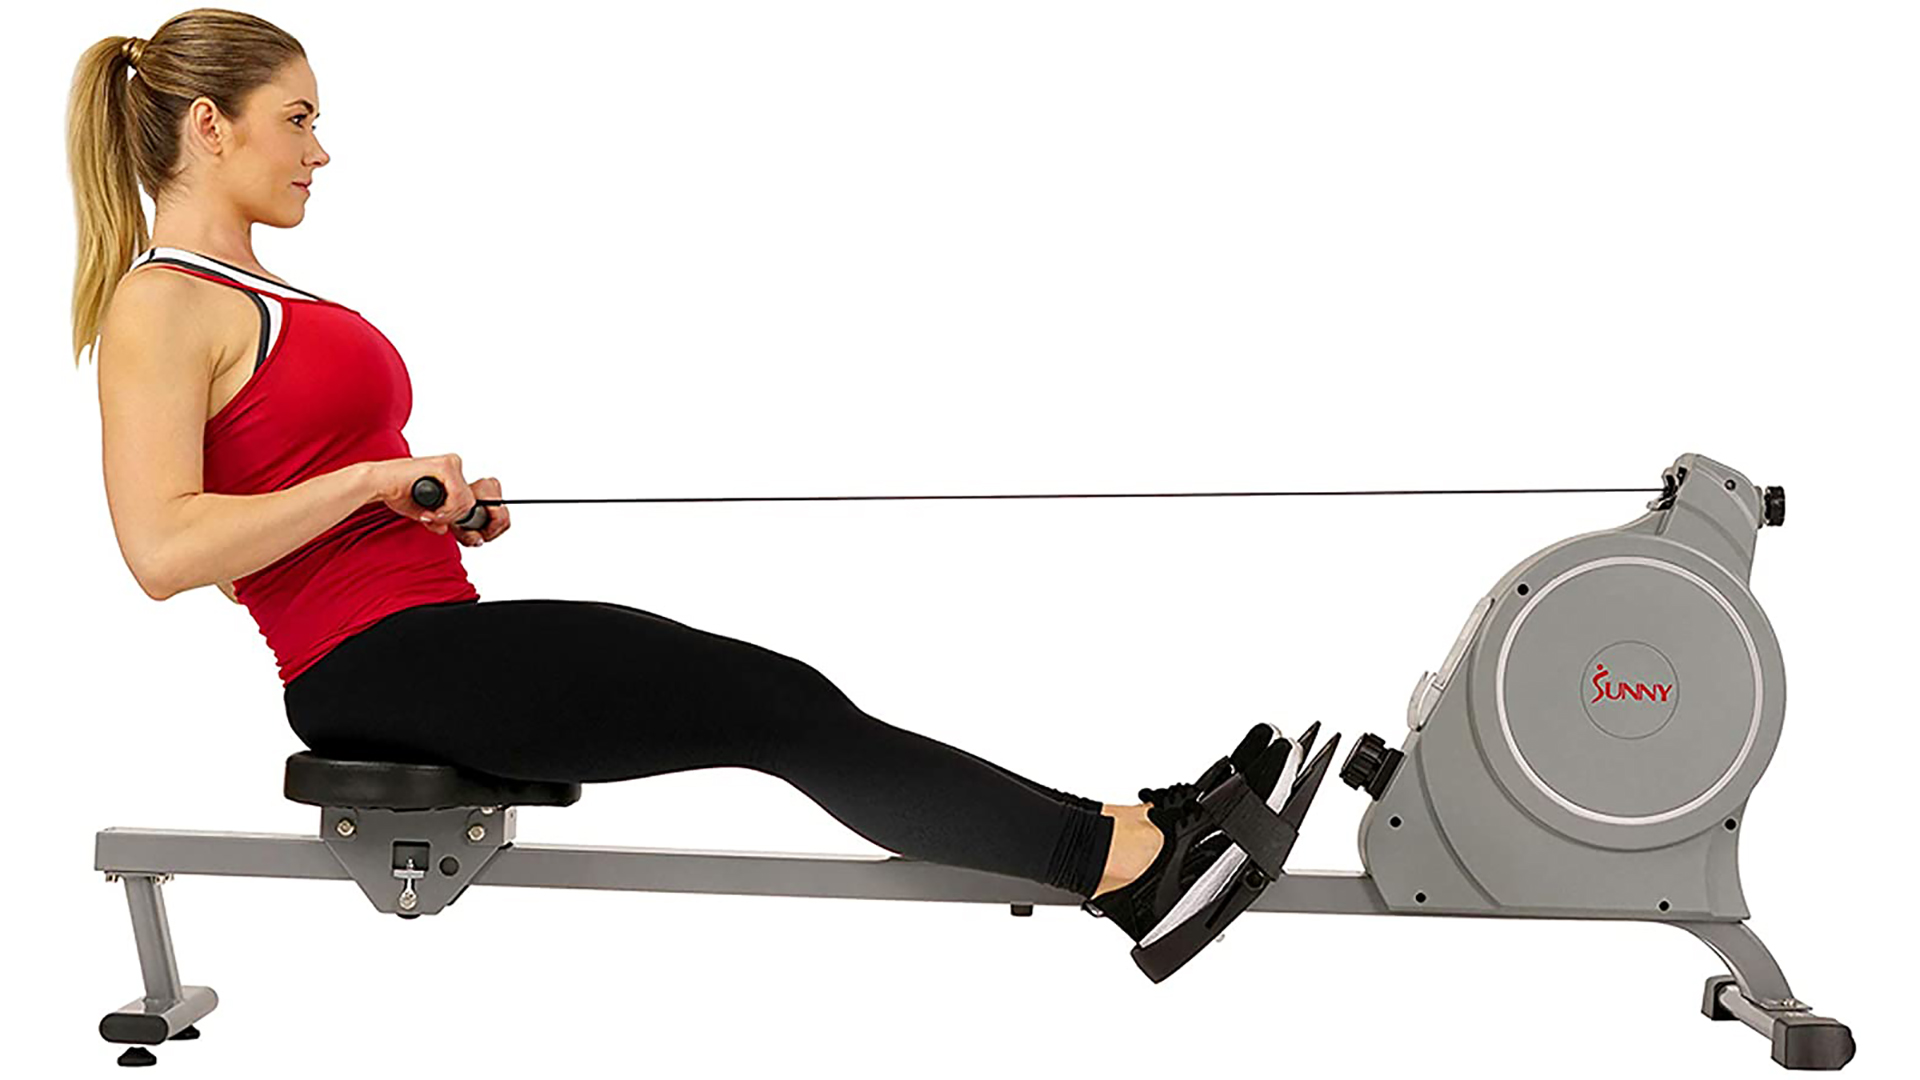 Rowing machine on sale: Product image of Sunny Health and Fitness